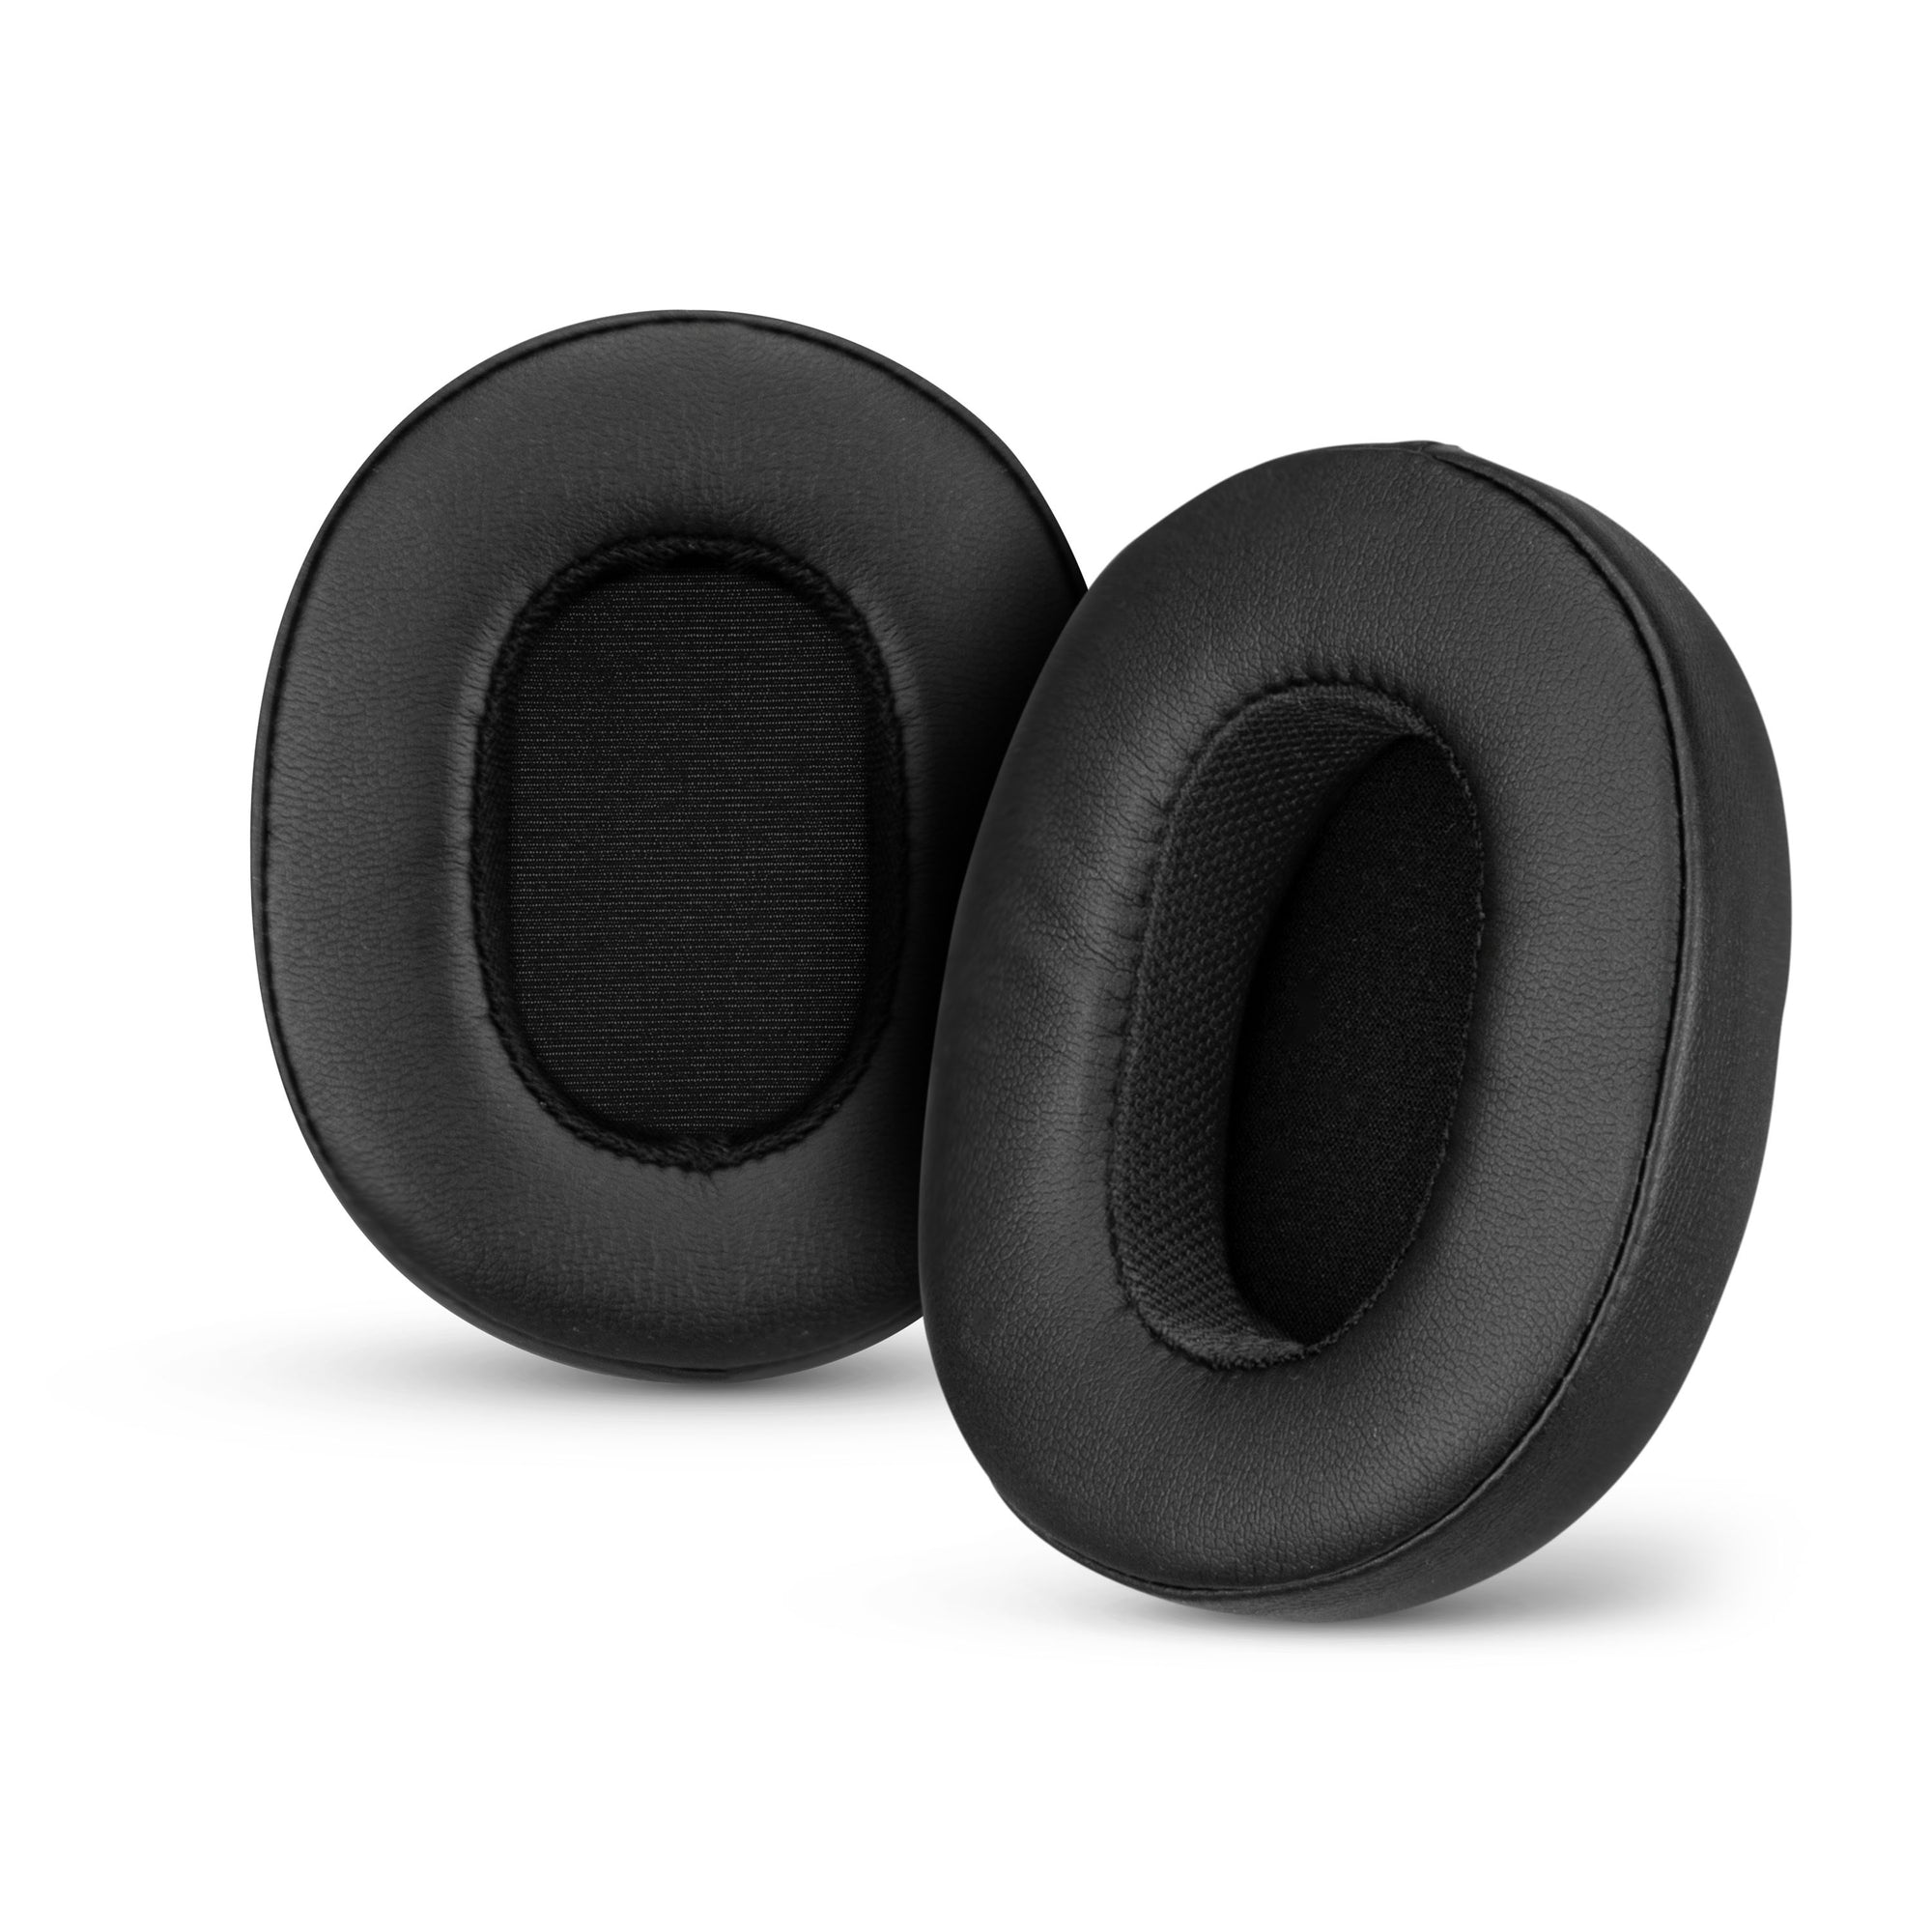 Replacement Earpads for Skullcandy Crusher Wireless, Hesh 3/ANC/EVO, Venue ANC & More - Extra Comfortable Foam, Durability and Noise Isolation